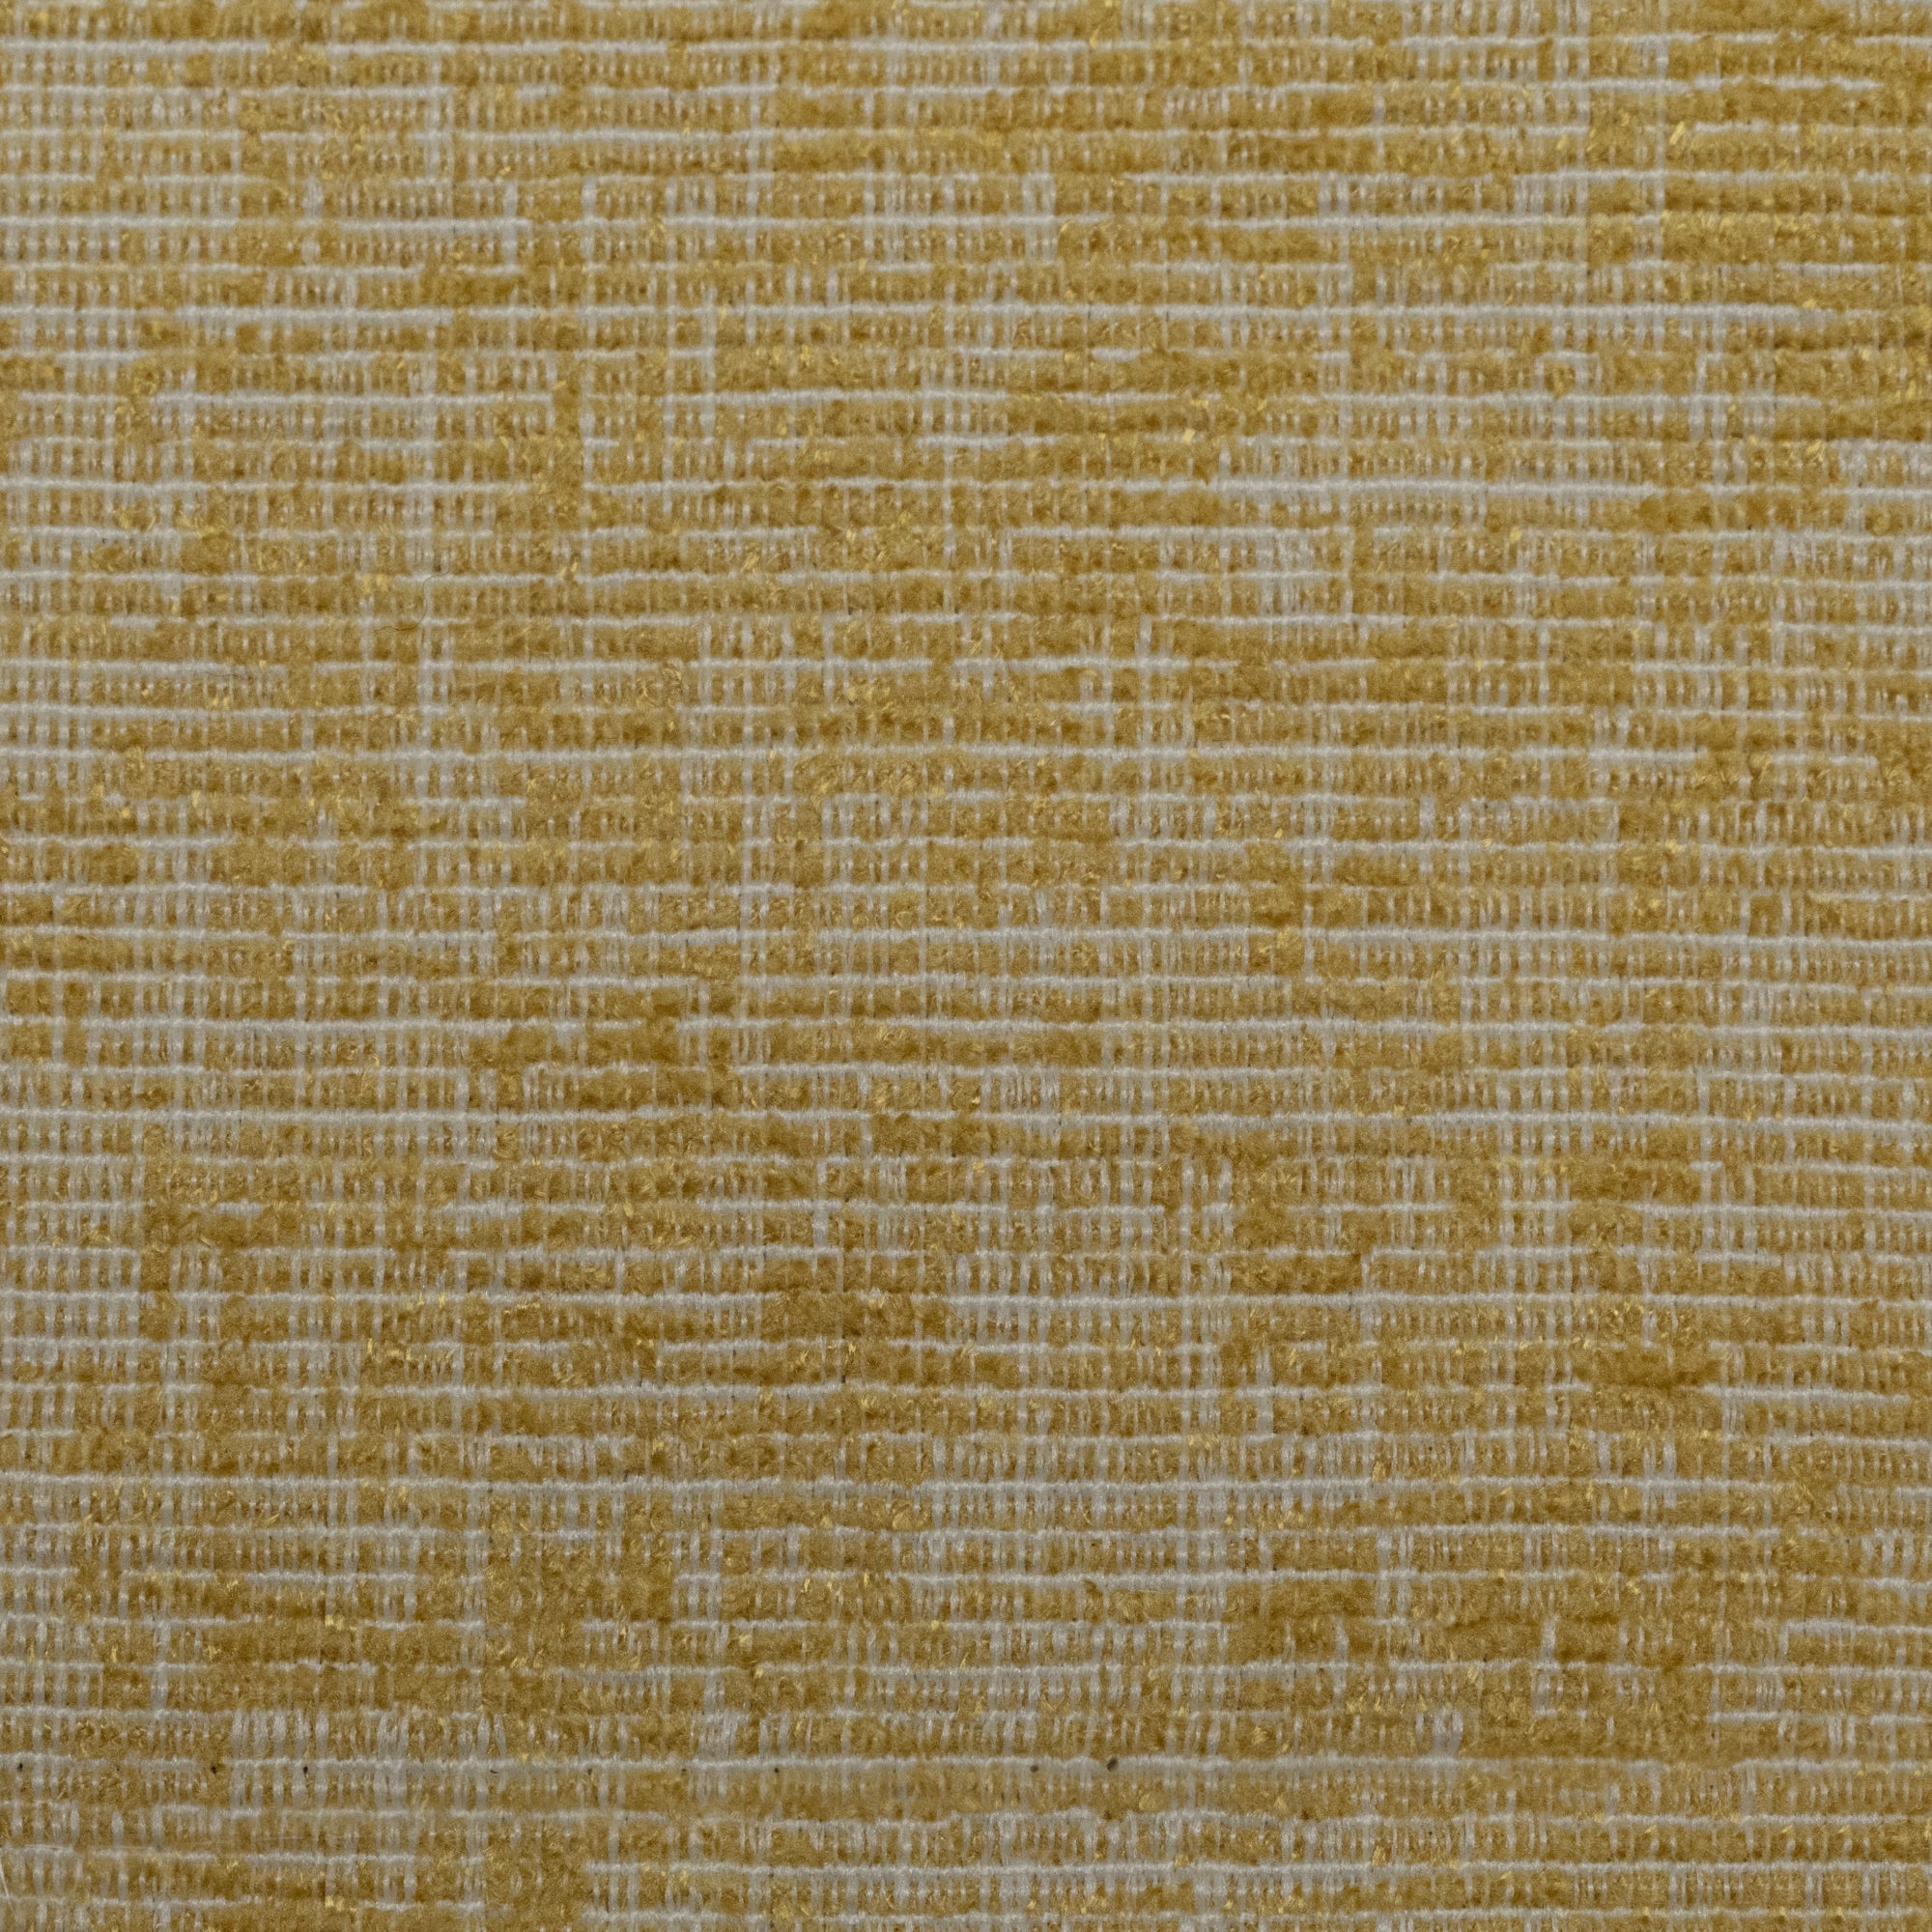 Splendid - Textured Chenille Upholstery Fabric by the Yard - 17 Colors